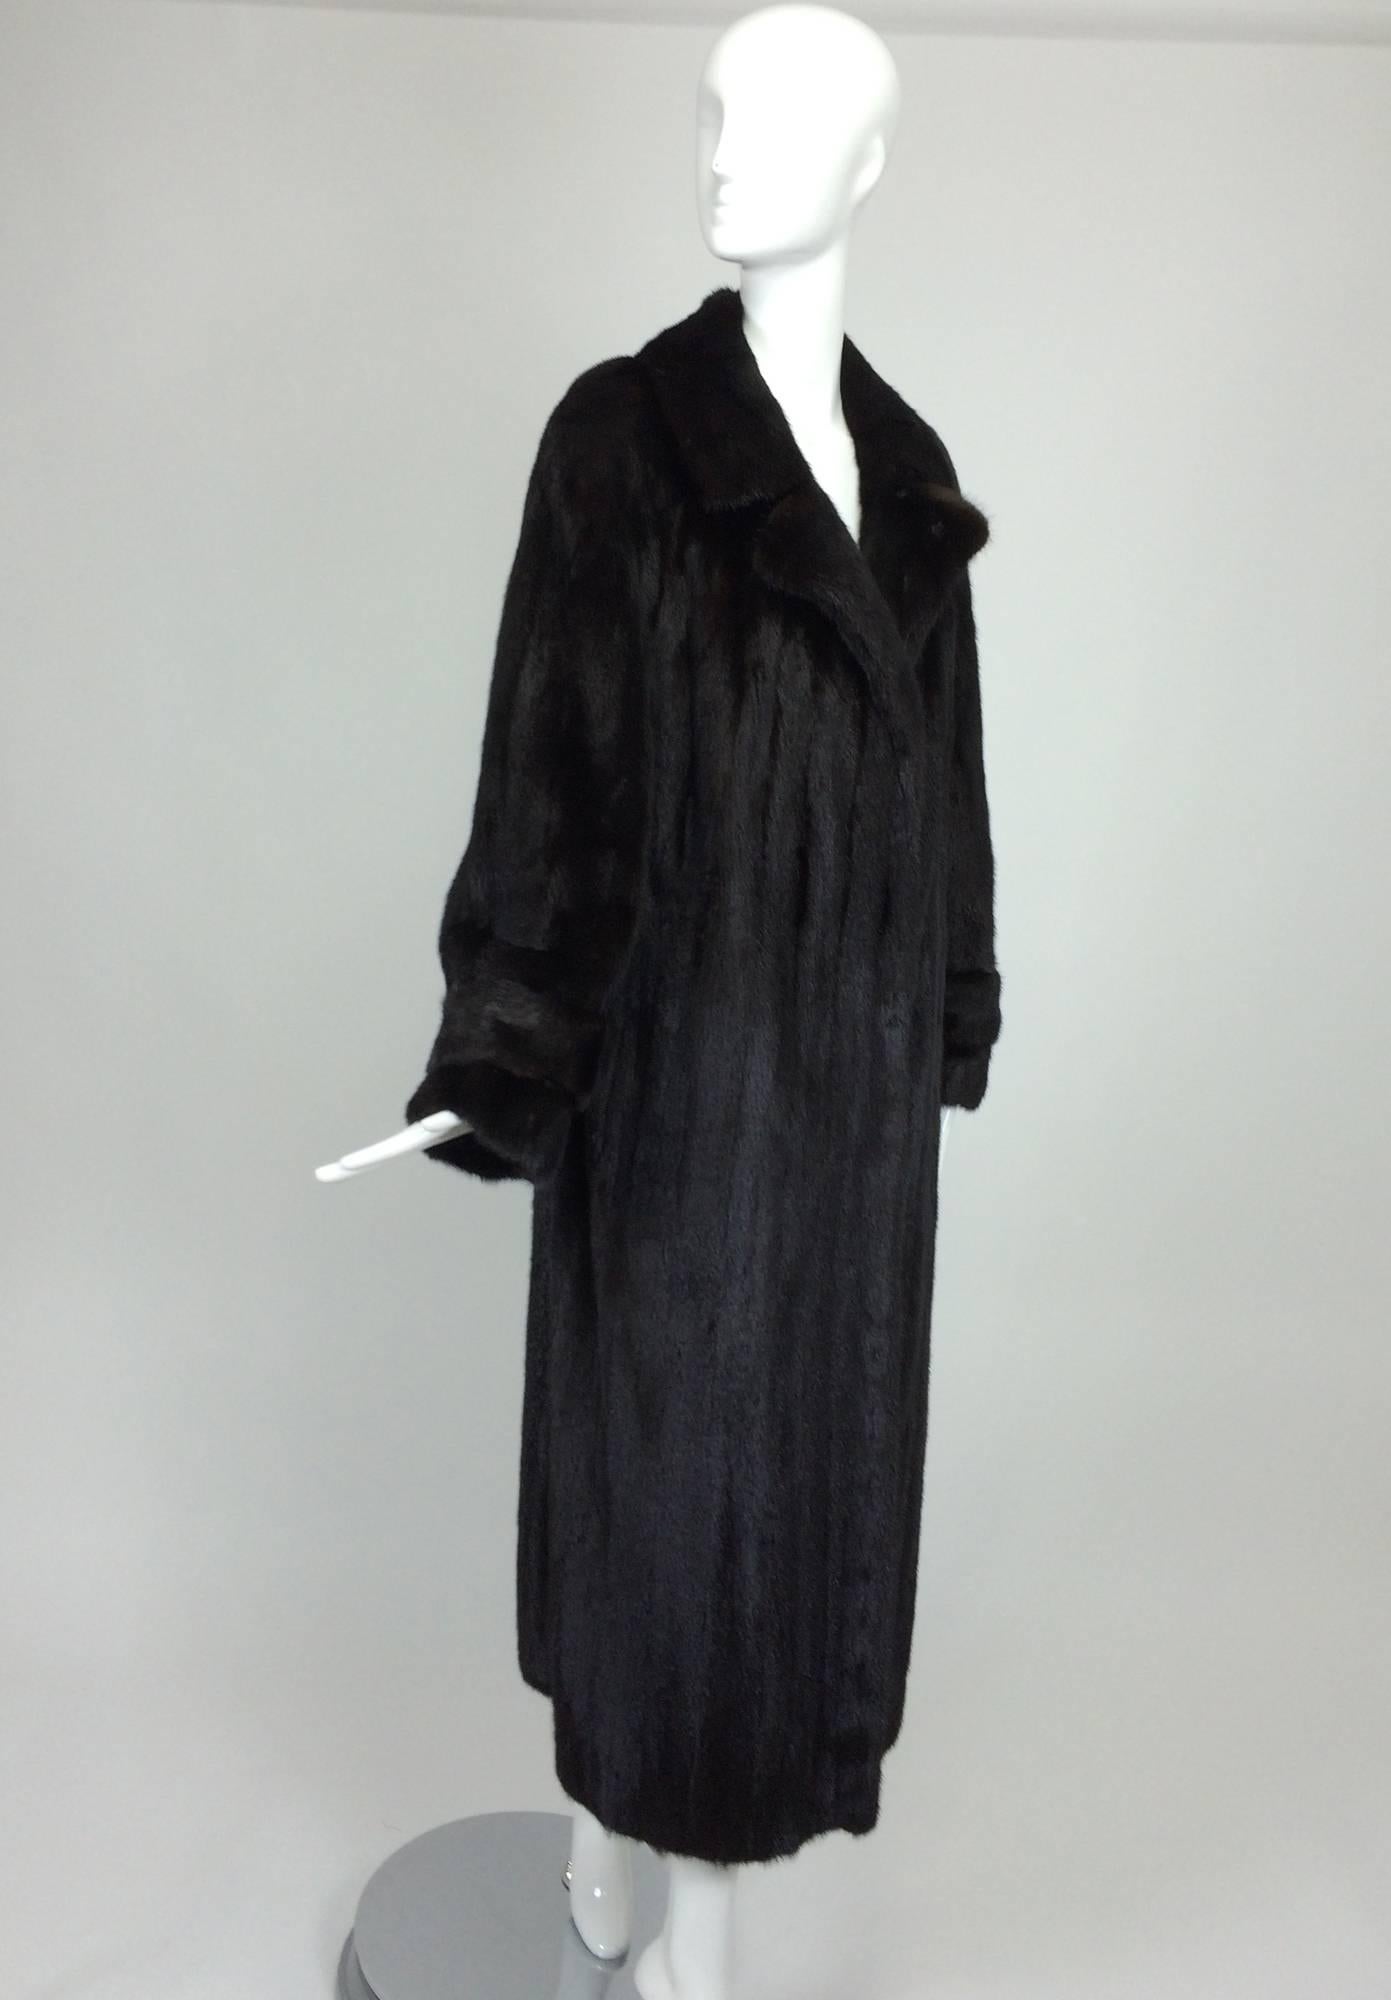 Black full length mink fur coat belt back 1990s Lord & Taylor...Beautiful, full length mink fur coat in black, with notched collar lapels, long full belted sleeves, coat closes at the front with fur hooks, the back features a low 1/2 belt...Fully